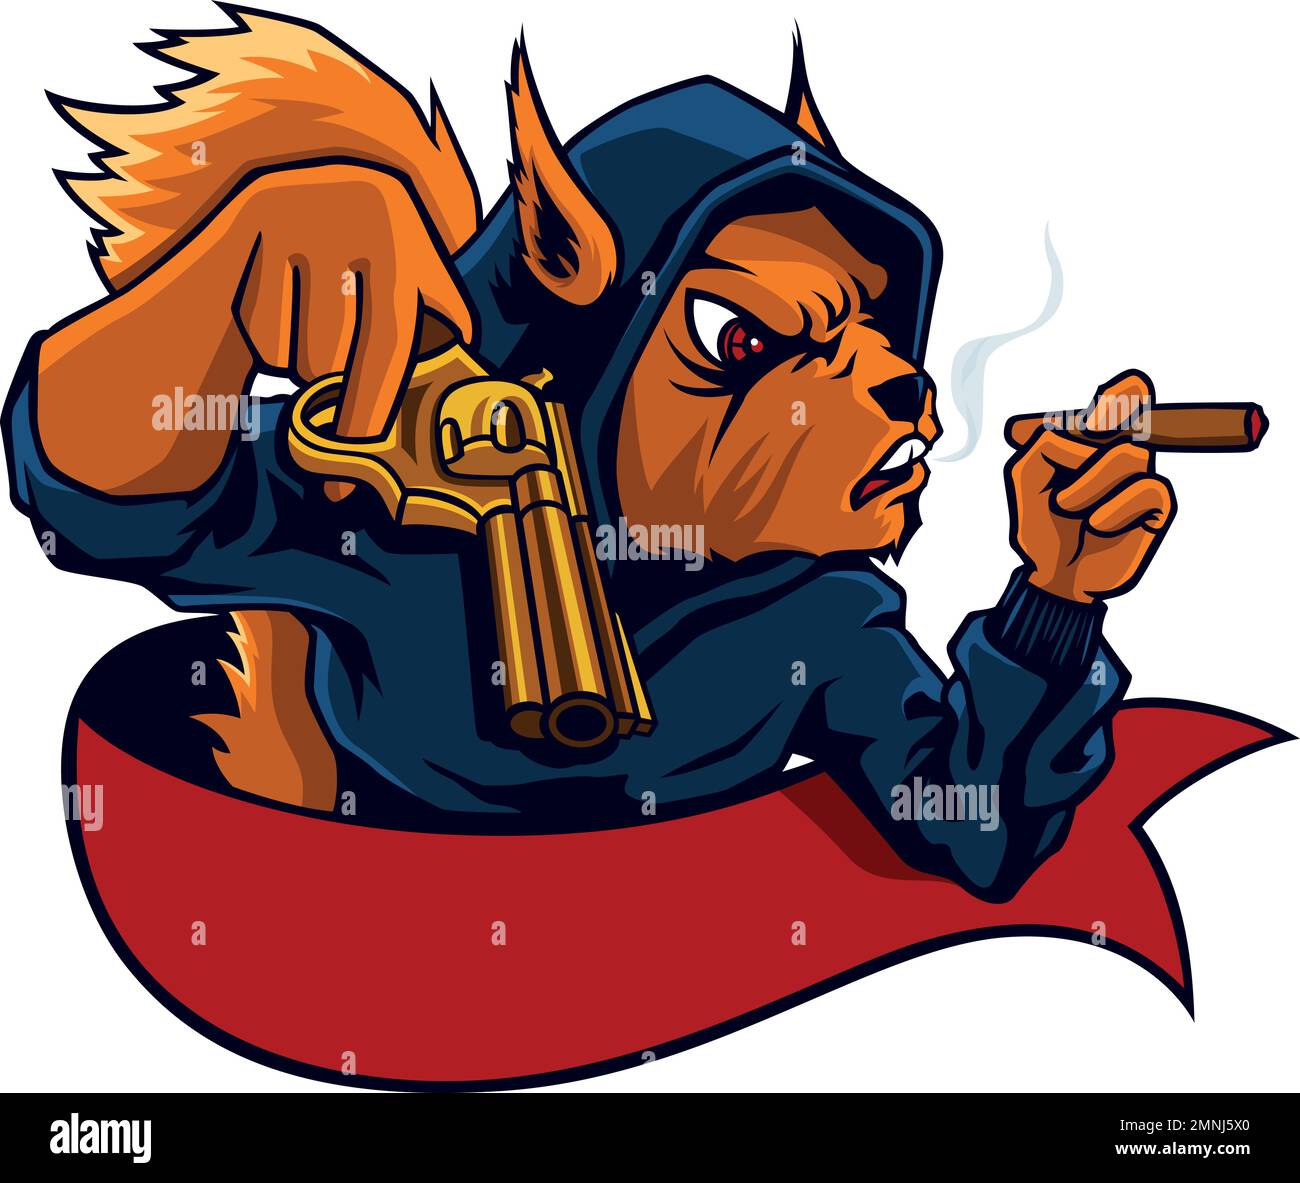 The Squirrel Gangster Holding a Golden Colt and Smoking Cigar Stock Vector